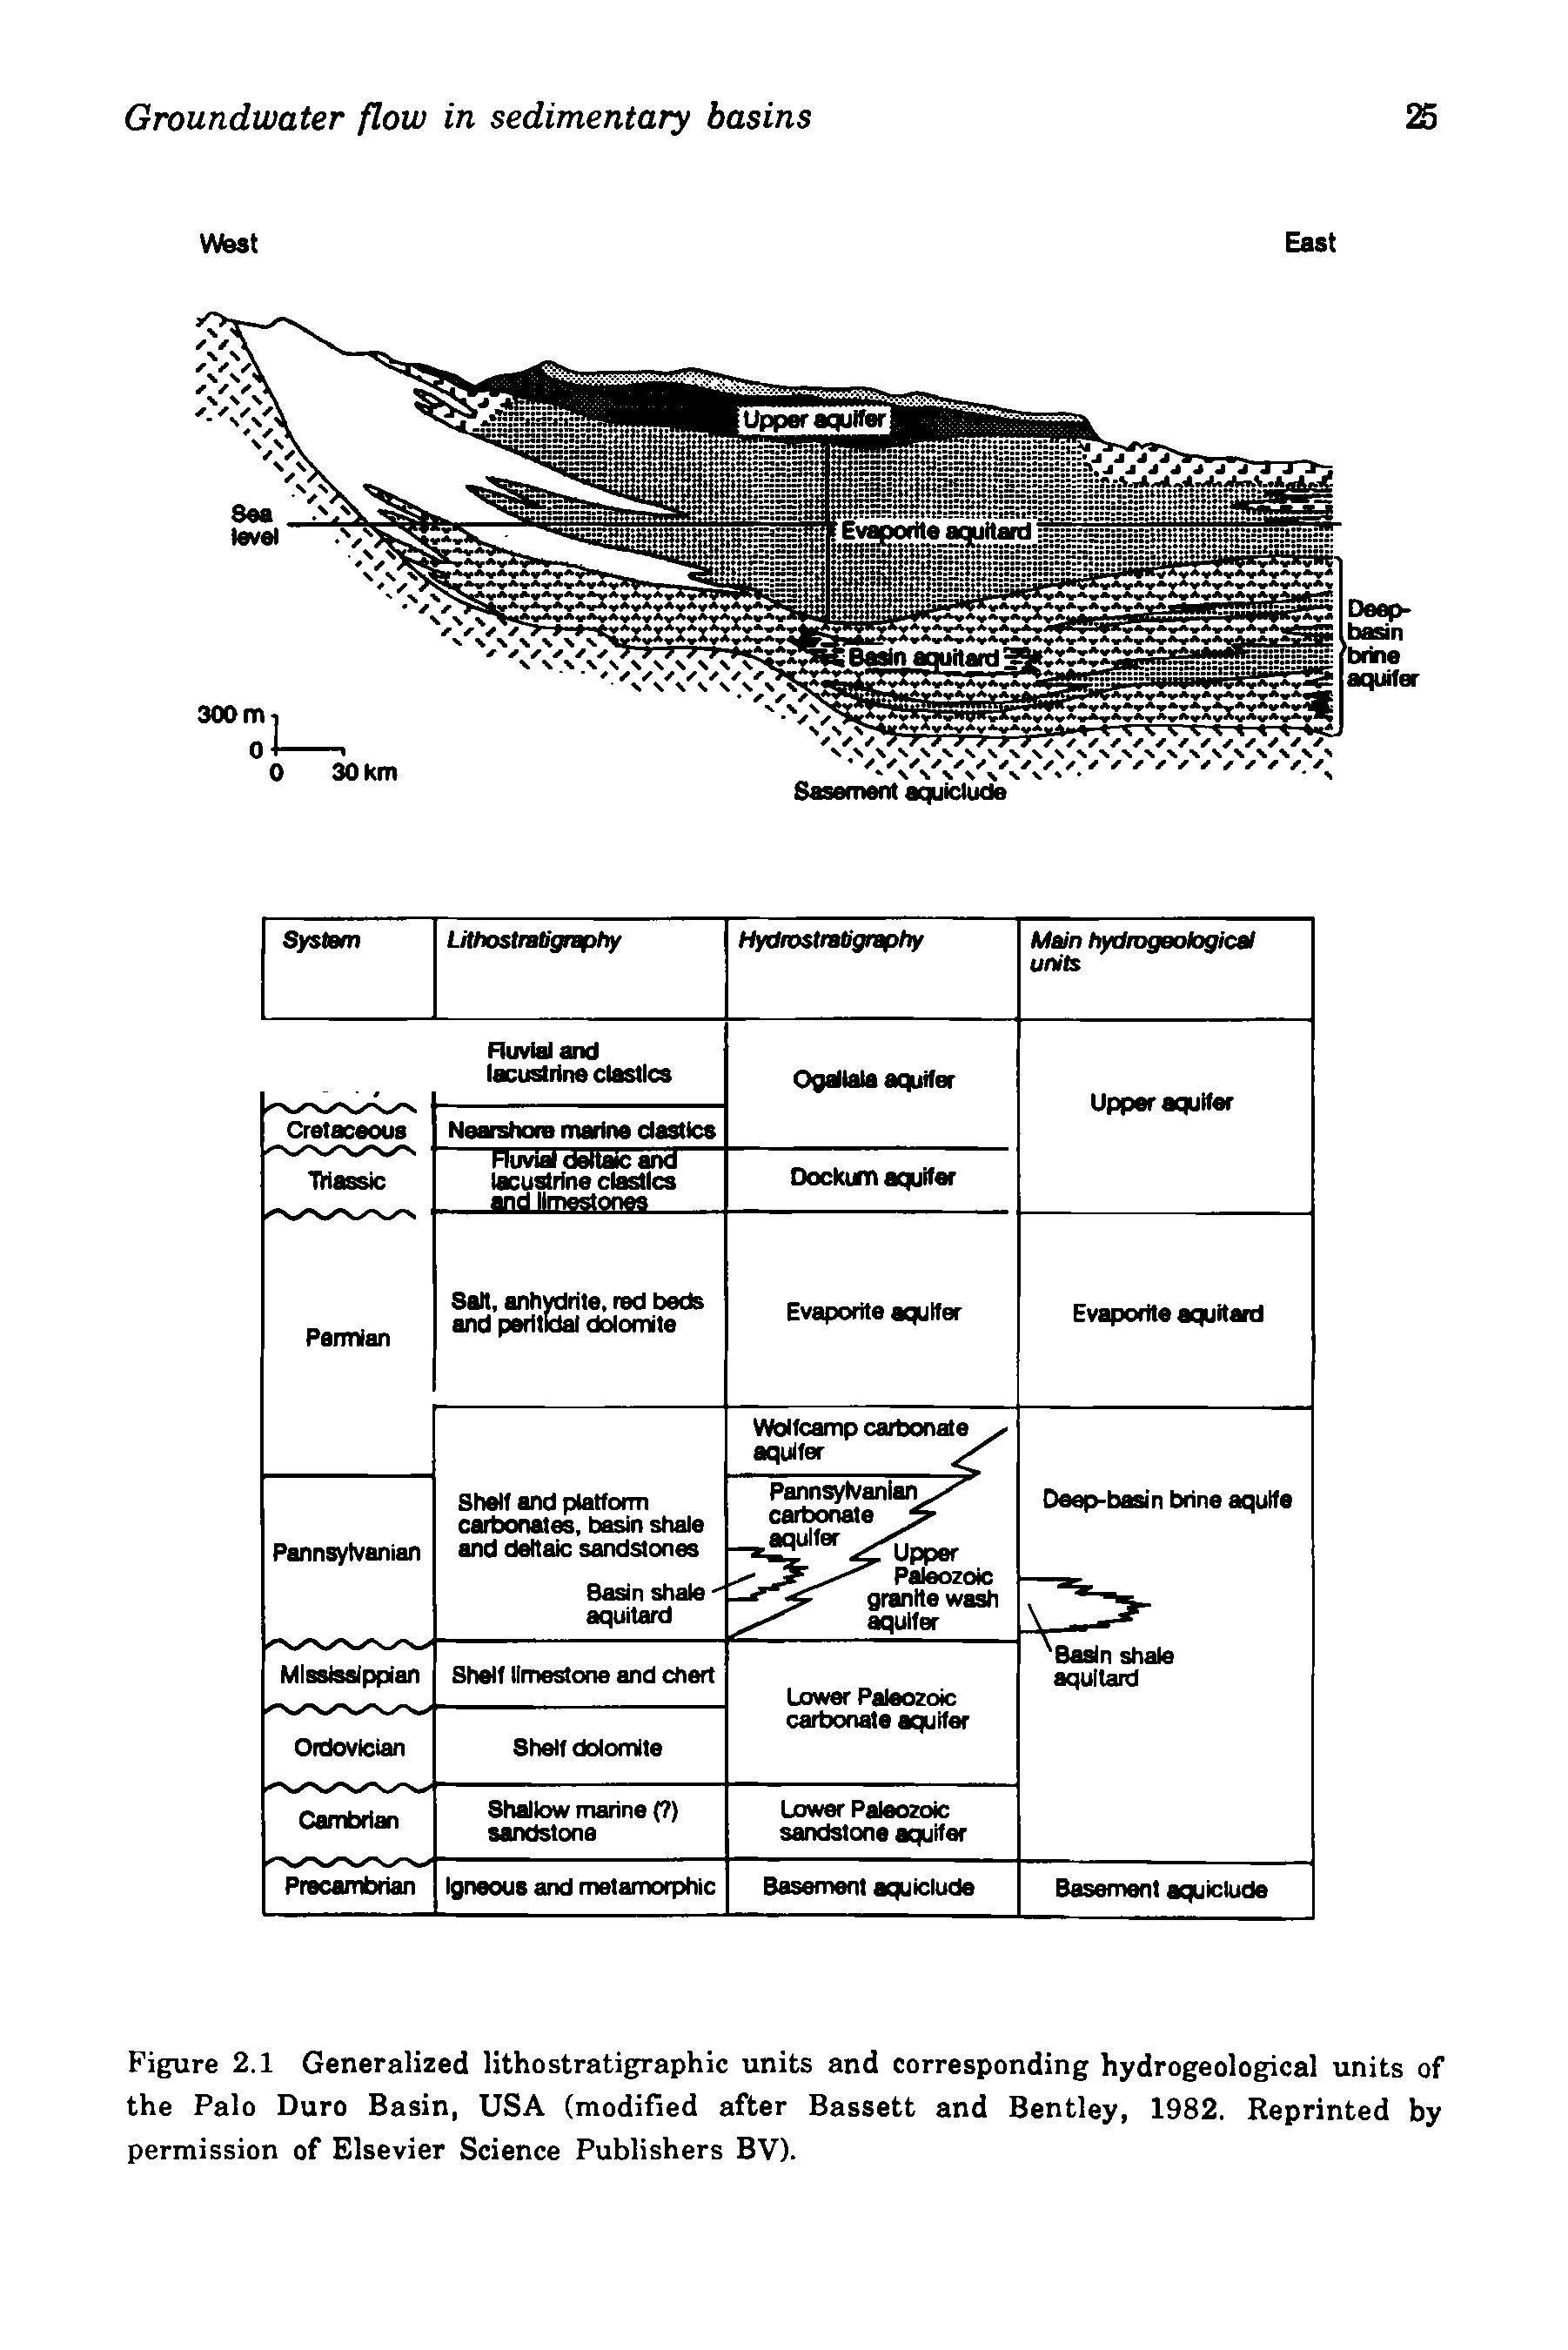 Figure 2.1 Generalized lithostratigraphic units and corresponding hydrogeological units of the Palo Duro Basin, USA (modified after Bassett and Bentley, 1982. Reprinted by permission of Elsevier Science Publishers BV).